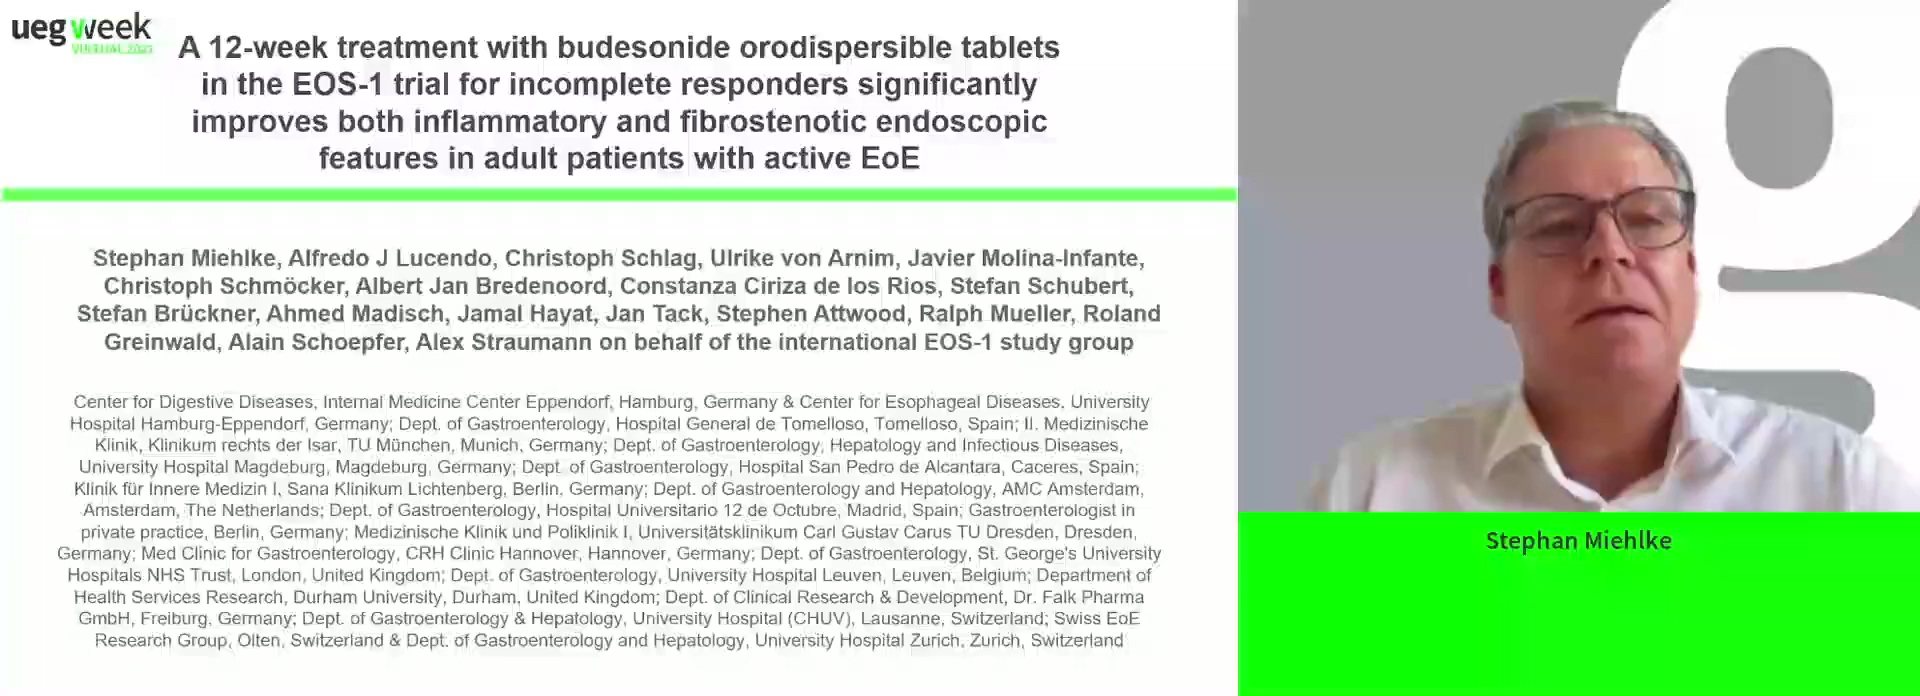 A 12-WEEK TREATMENT WITH BUDESONIDE ORODISPERSIBLE TABLETS IN THE EOS-1 TRIAL FOR INCOMPLETE RESPONDERS SIGNIFICANTLY IMPROVES BOTH INFLAMMATORY AND FIBROSTENOTIC ENDOSCOPIC FEATURES IN ADULT PATIENTS WITH ACTIVE EOSINOPHILIC ESOPHAGITIS